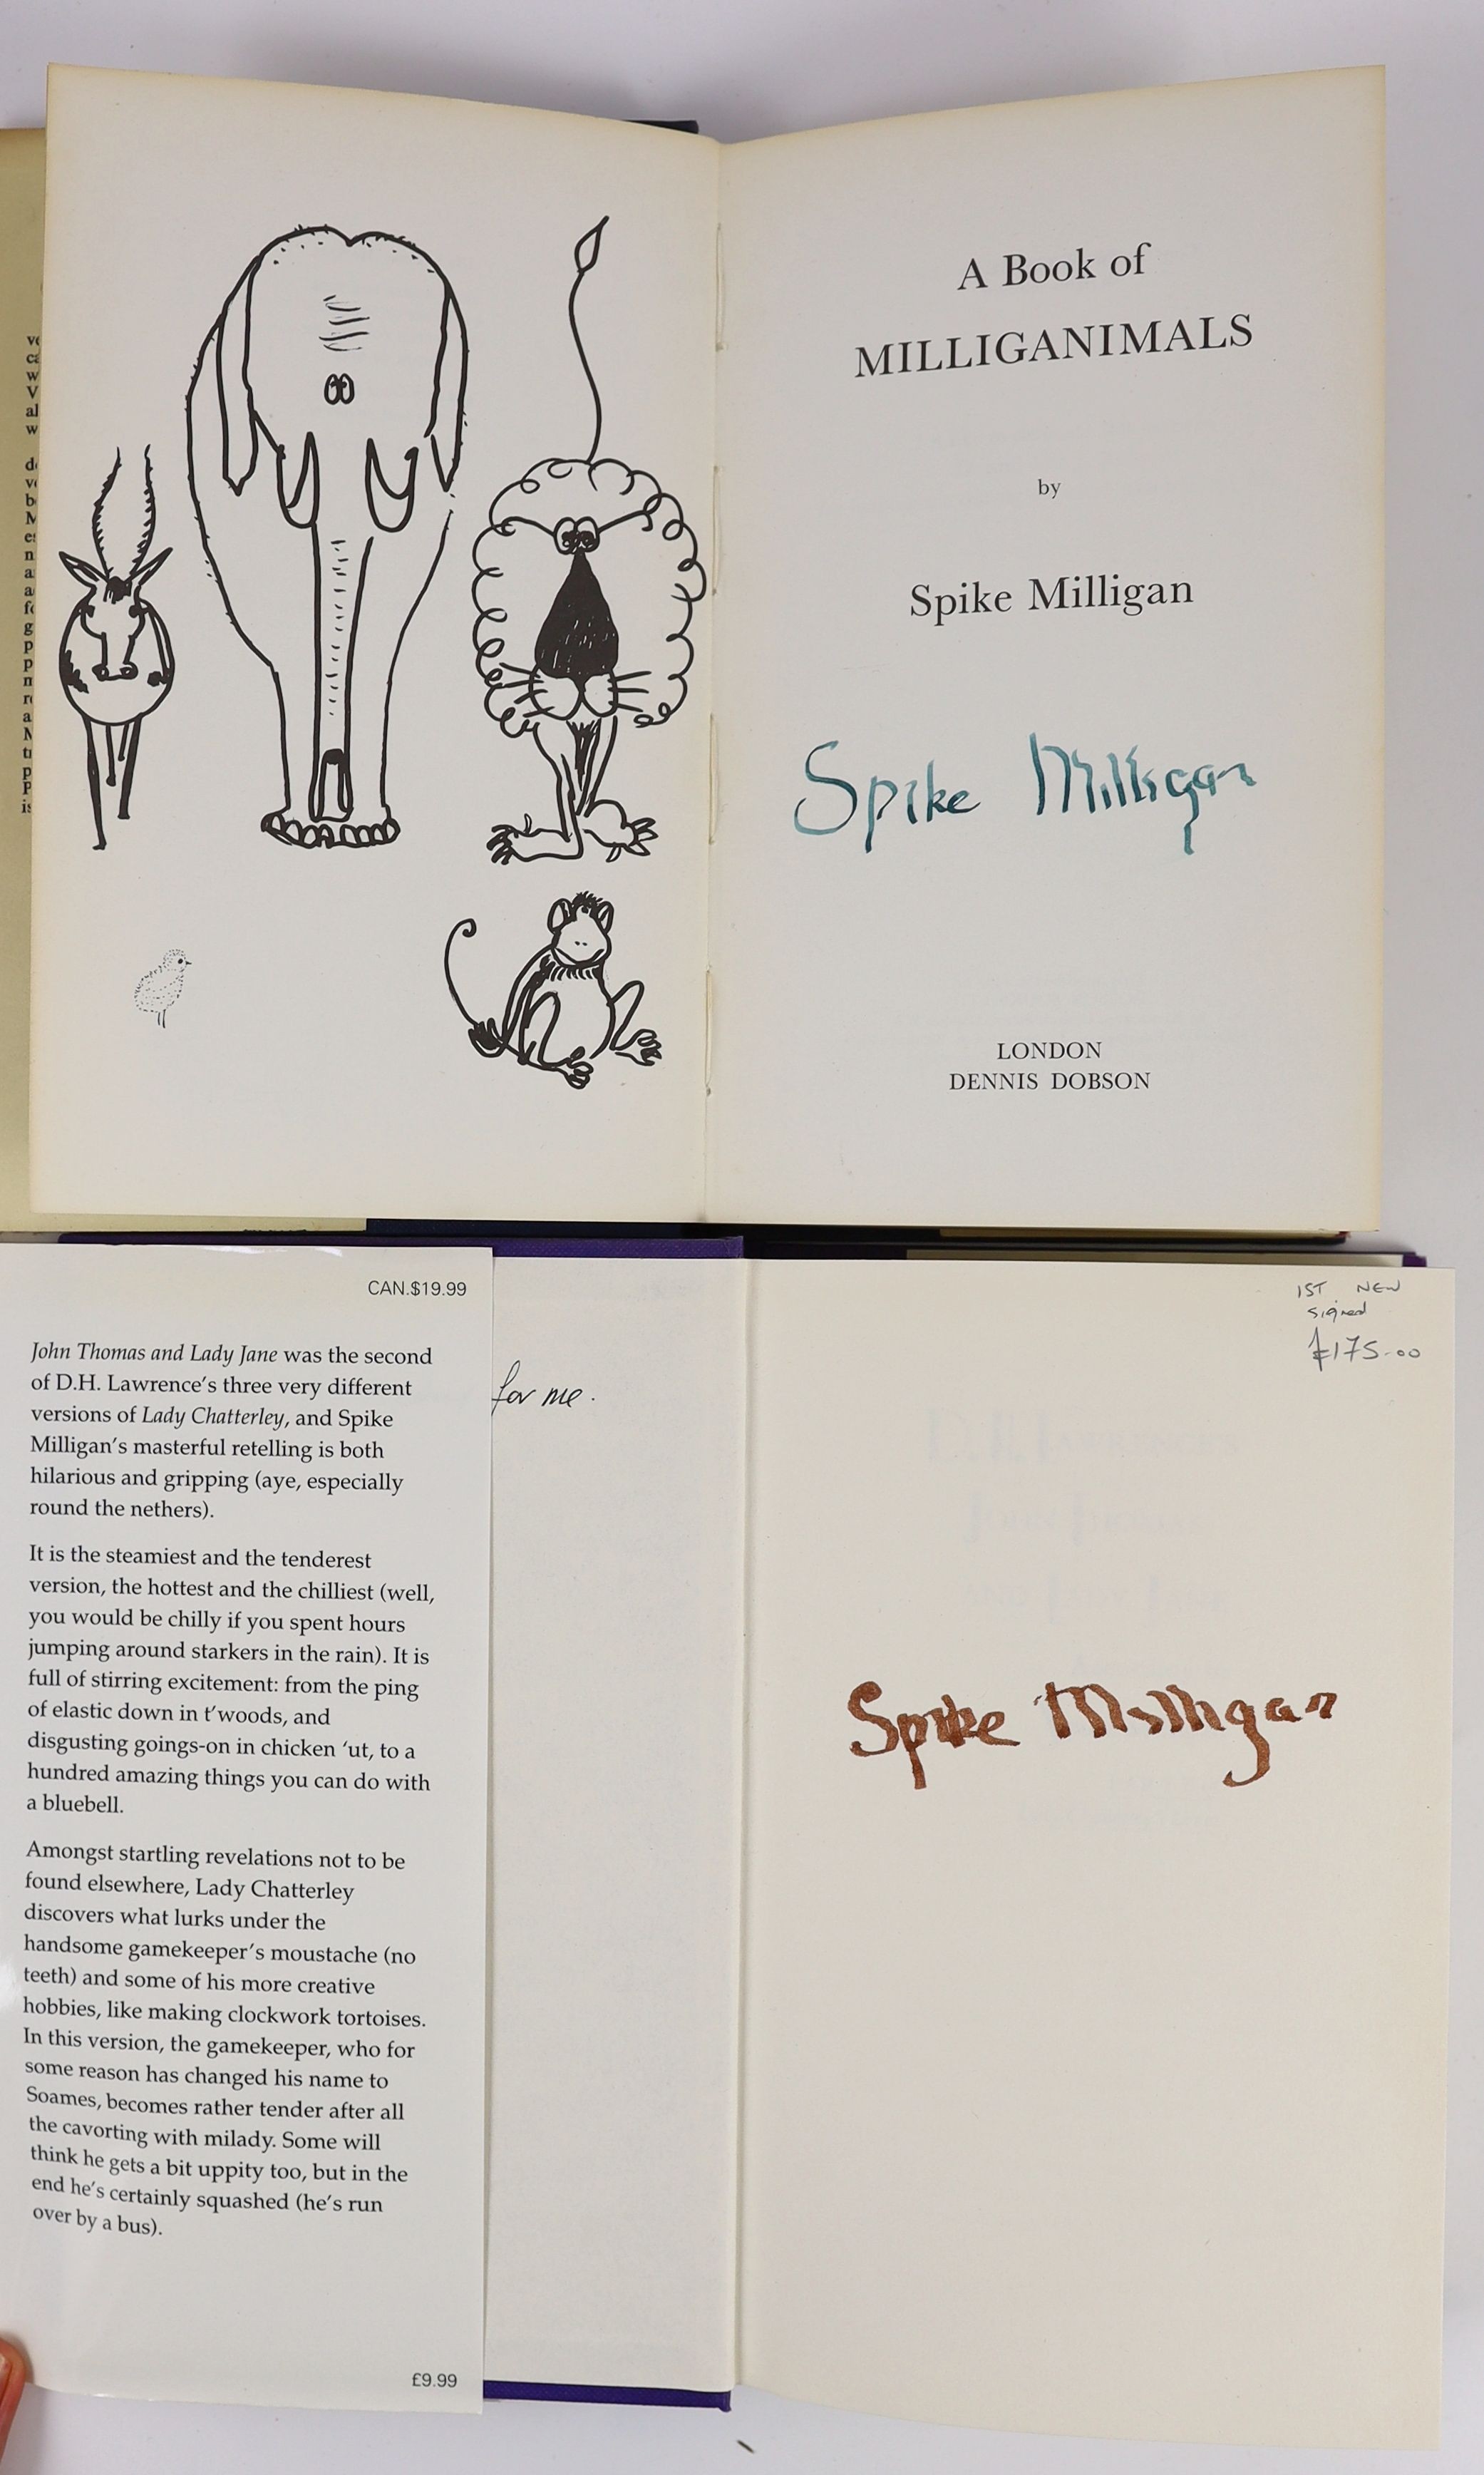 Milligan, Spike - D. H. Lawrence’s John Thomas & Lady Jane according to Spike Milligan. 1st ed. Signed on fly leaf. Publishers cloth with letters direct on spine, original pictorial d/j. 8vo. Michael Joseph, London, 1995